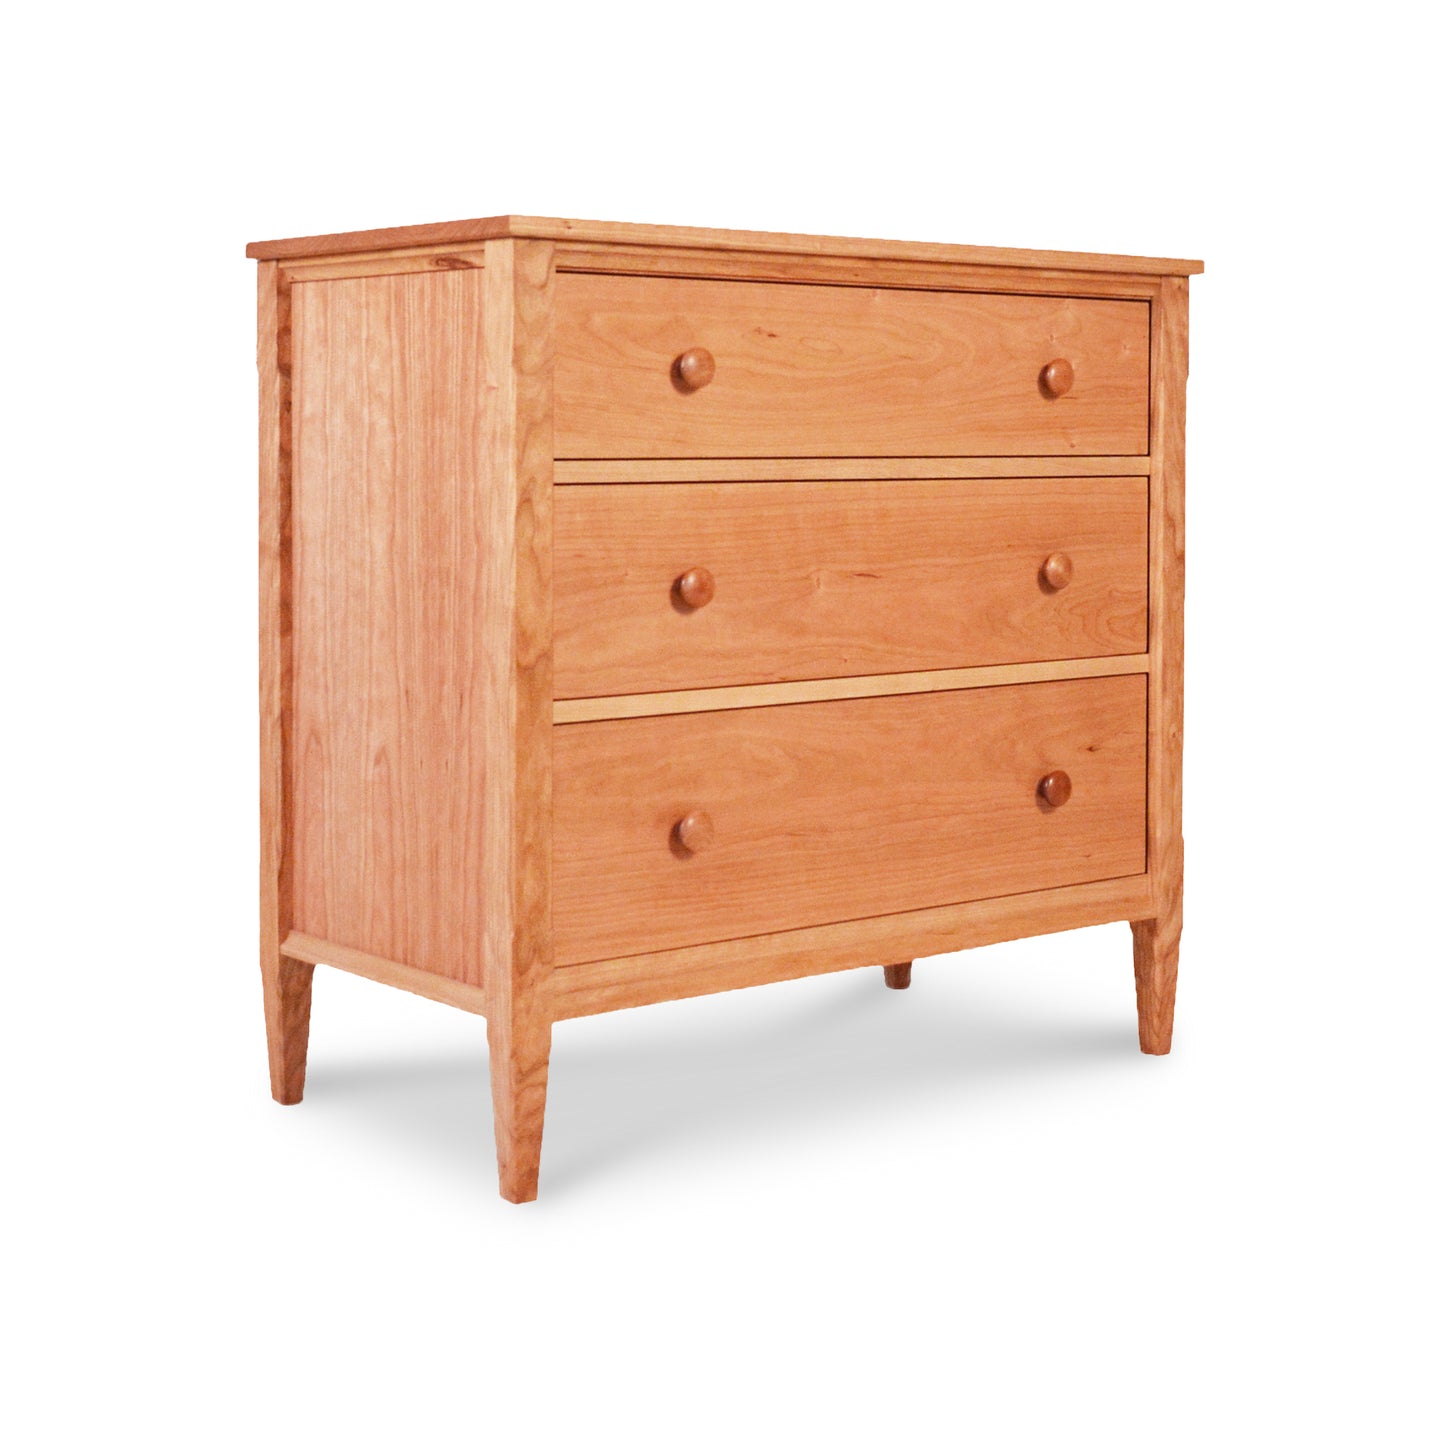 A Vermont Shaker 3-Drawer Chest from Maple Corner Woodworks, with round knobs and elevated legs, isolated on a white background. The wood has a natural, light finish.